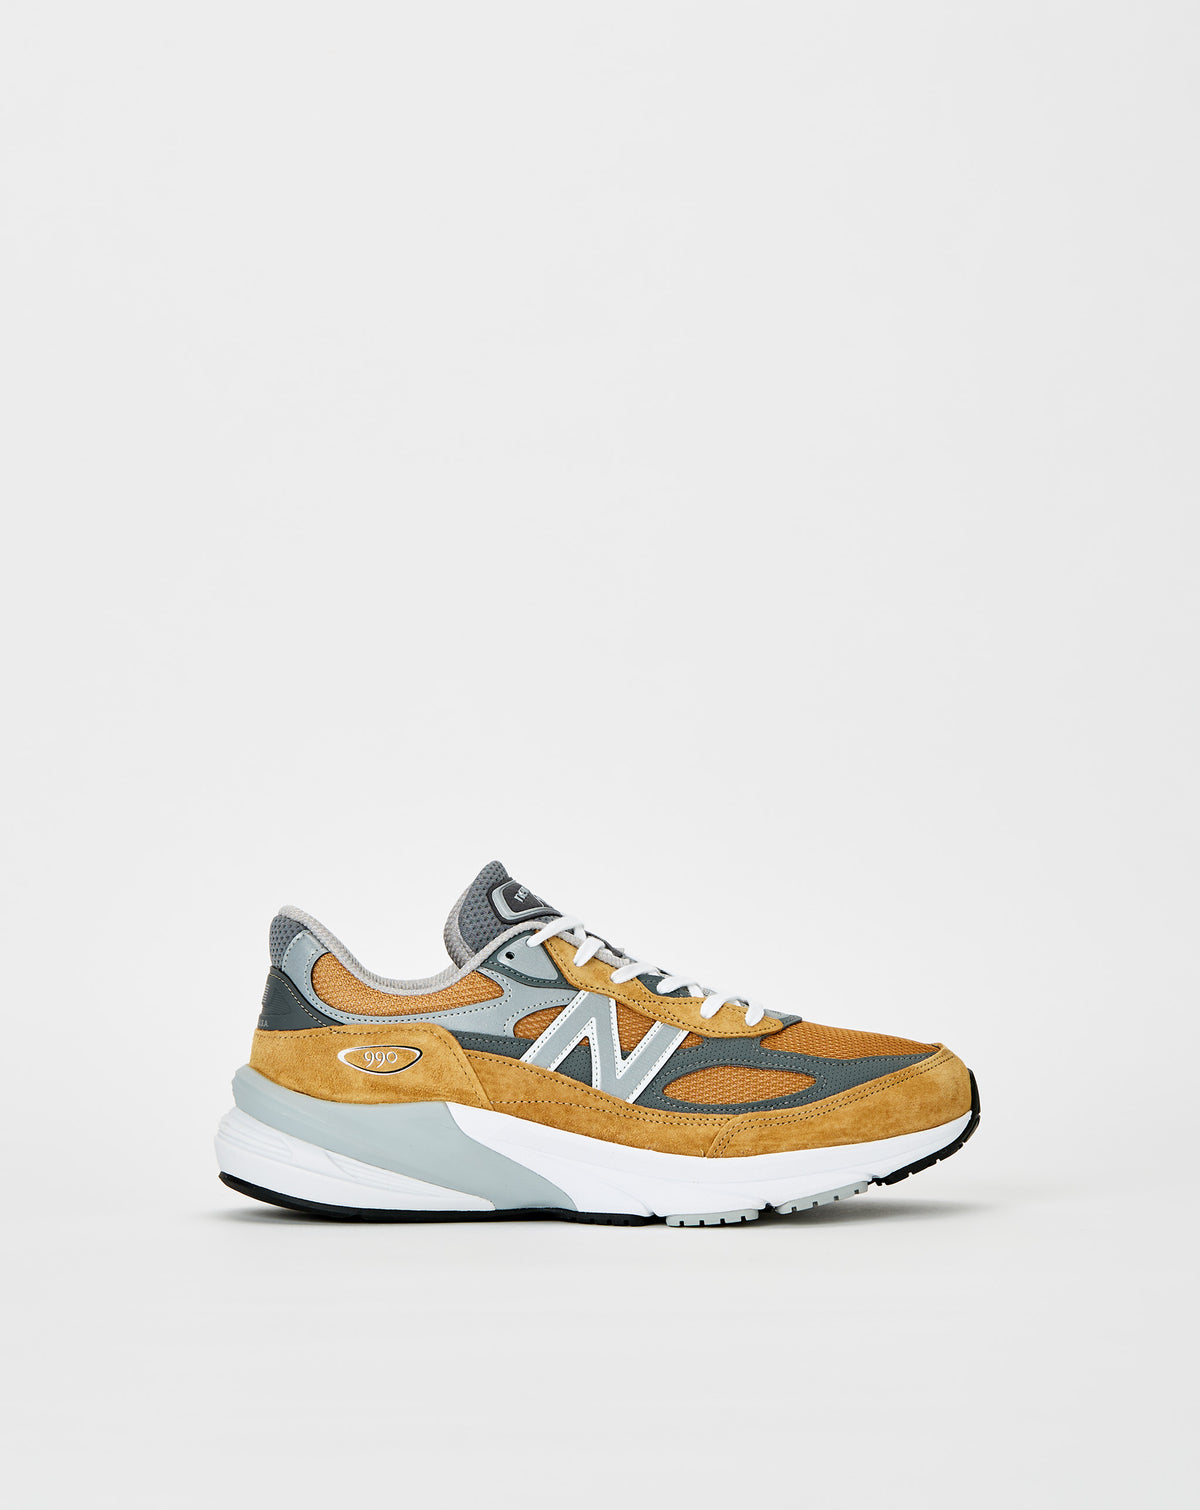 New Balance Made in USA 990v6 - Rule of Next Footwear